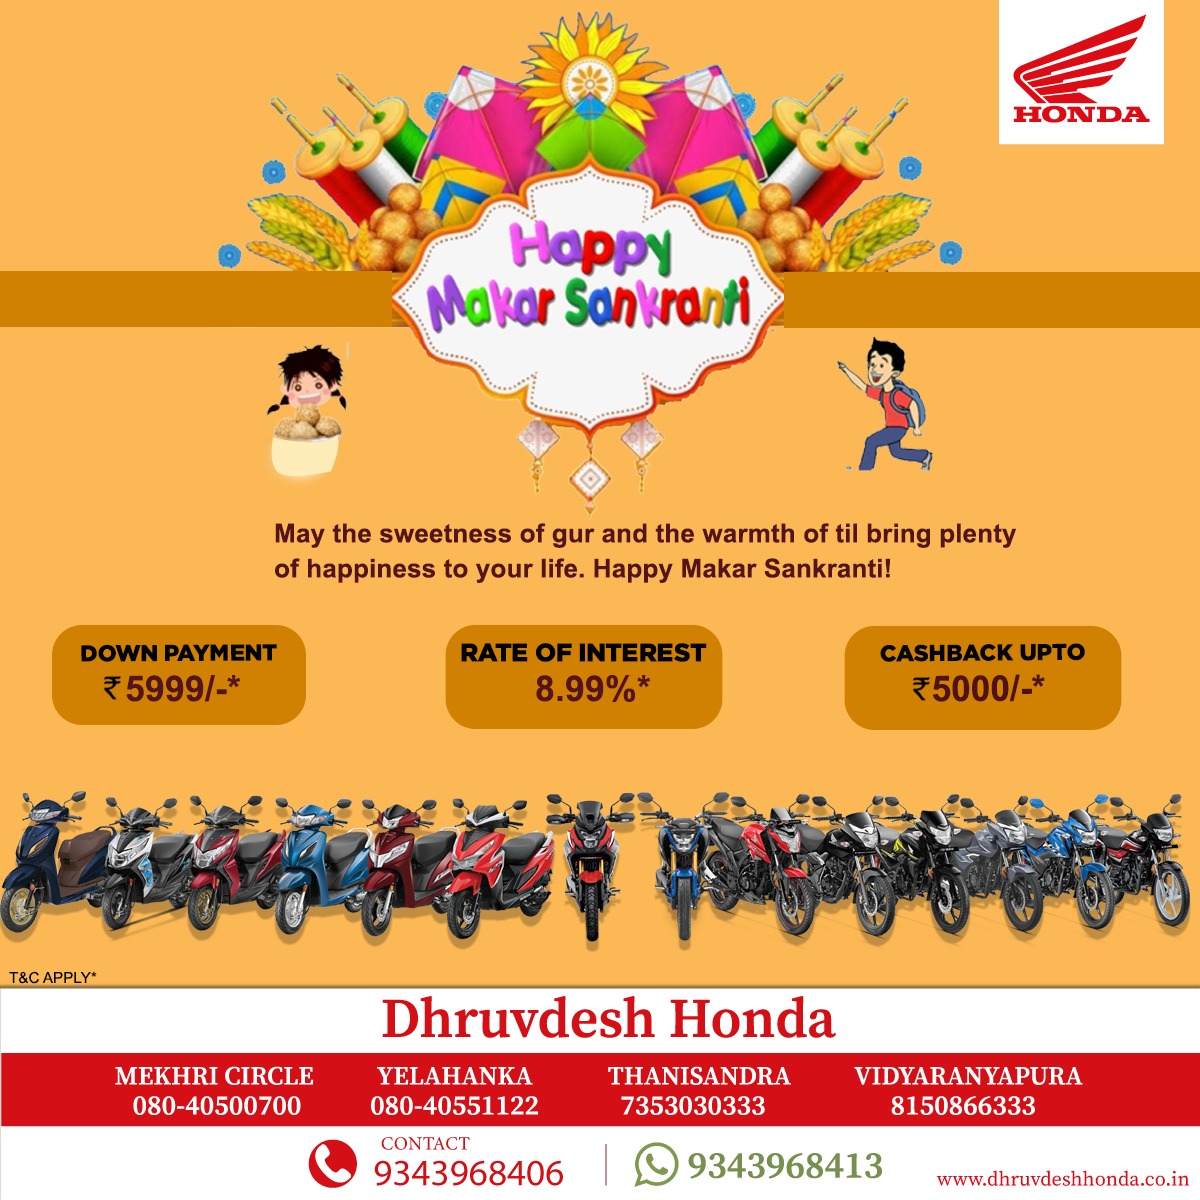 As we welcome the first festival of the year, may your Honda Two Wheeler bring you new happiness and good luck. Wishing you a very Happy Makar Sankranti.
Buy #HondaBikes or #HondaScooters  With Full Metal Body at a low down payment of ₹5999/-, Cashback up to ₹5000/-,  ROI 8.99%